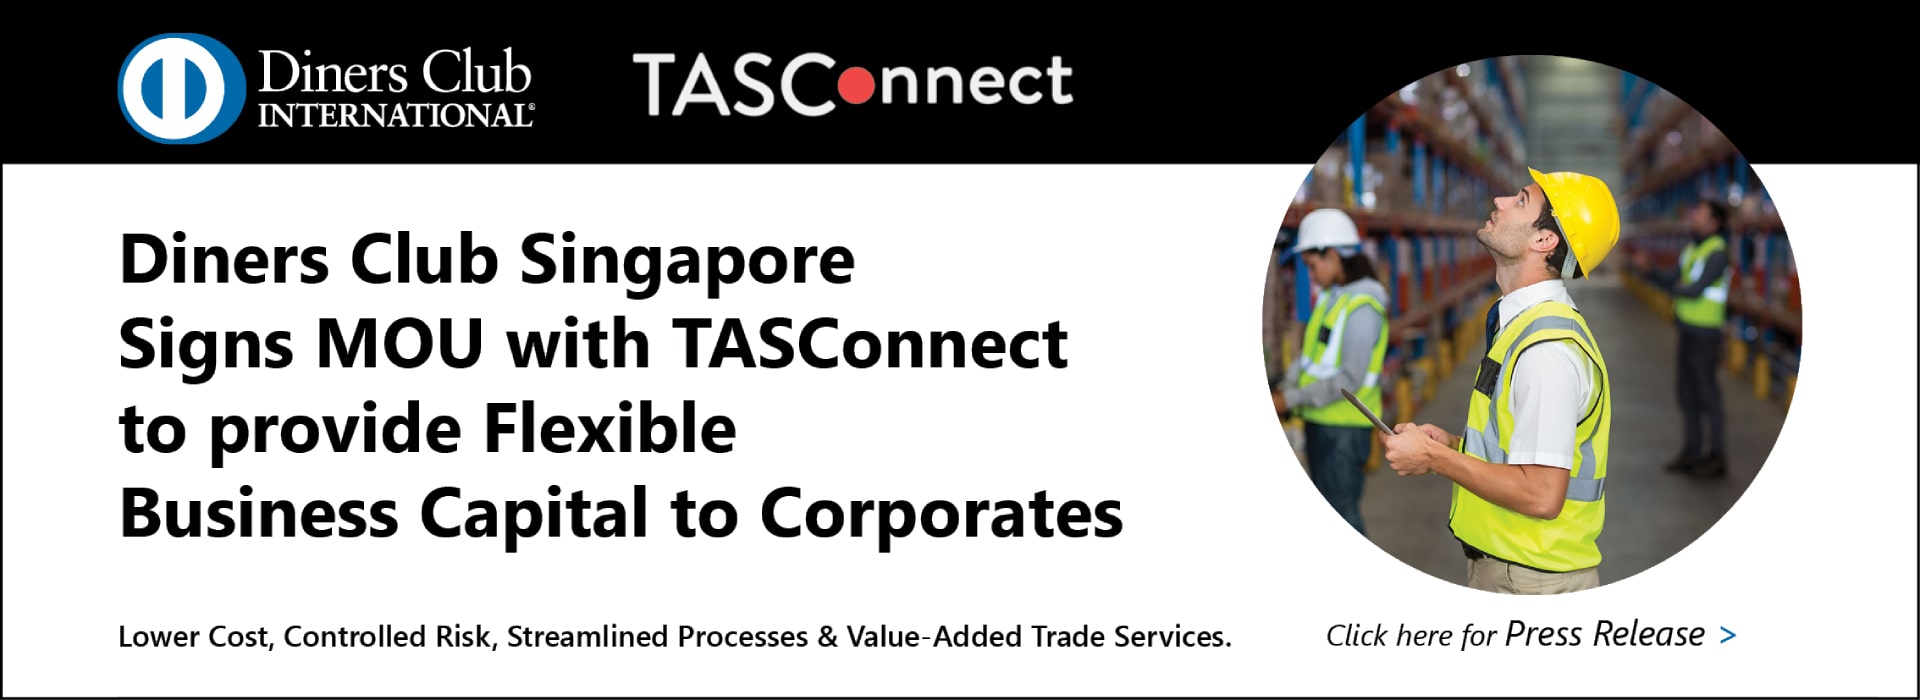 Diners Club Signs MOU with TASConnect to provide Flexible Business Capital to Corporates